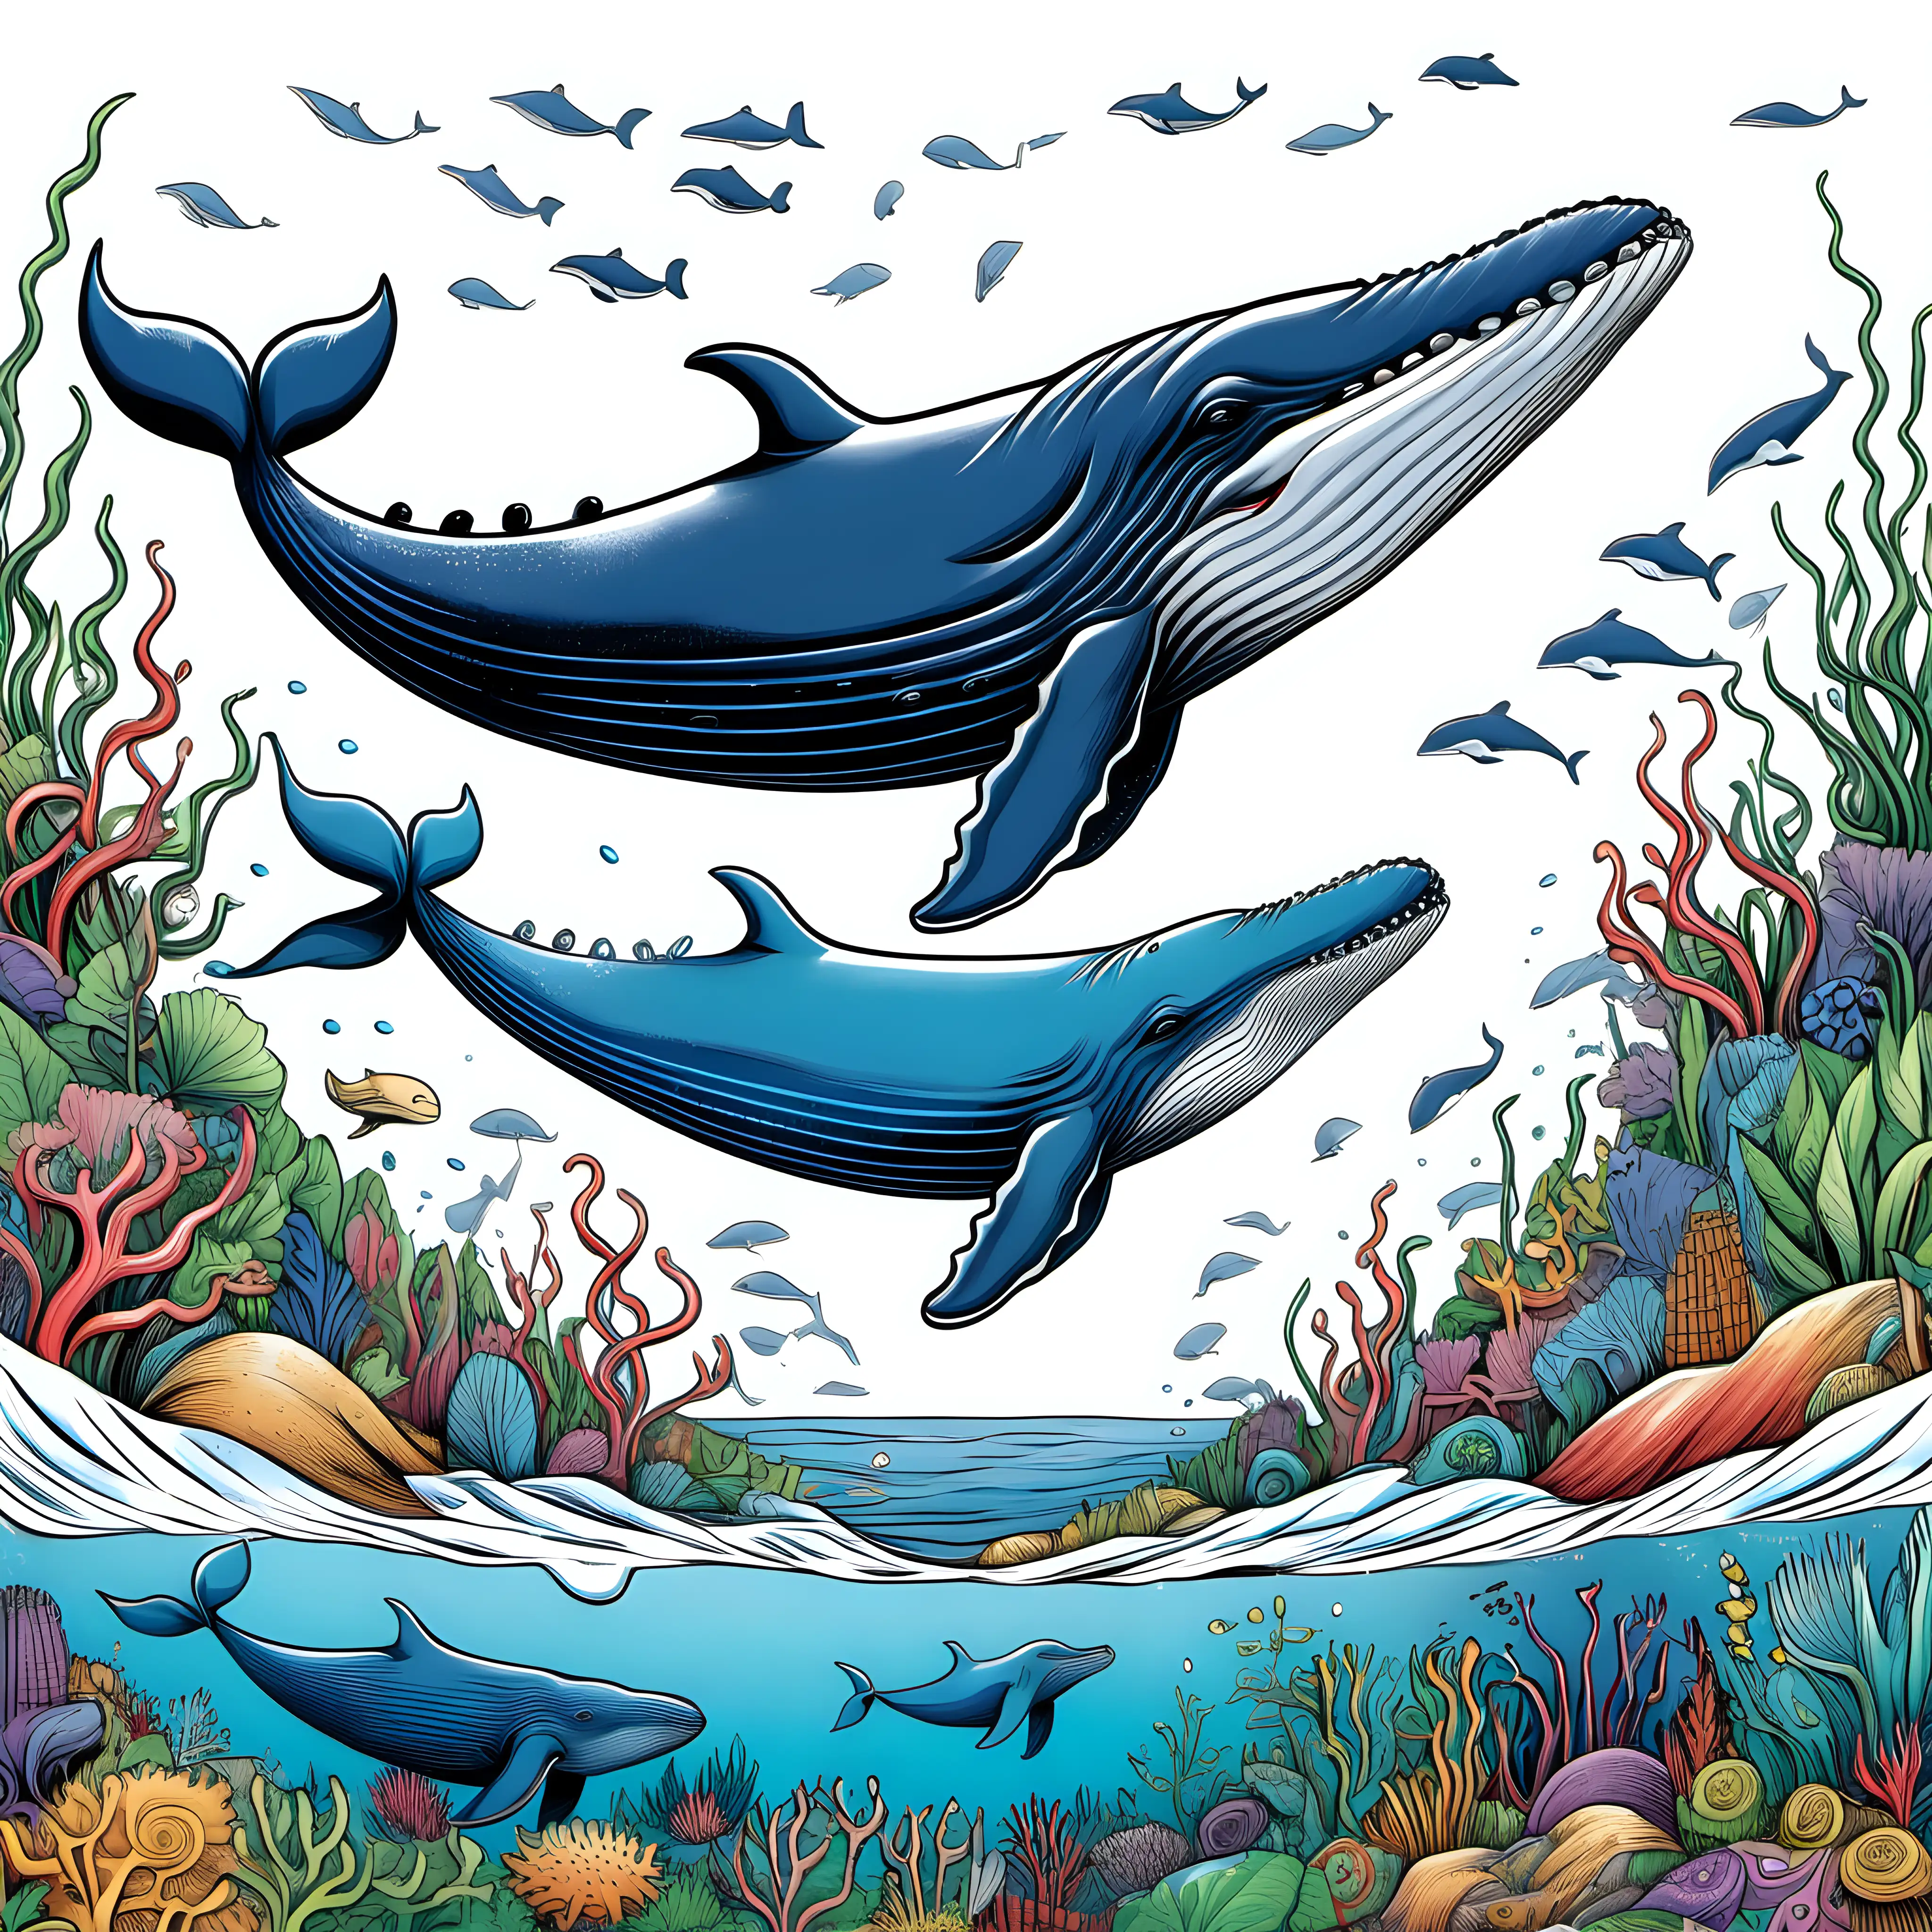 Vibrant Whales in the Garden of Eden Playful Marine Life in Full Color